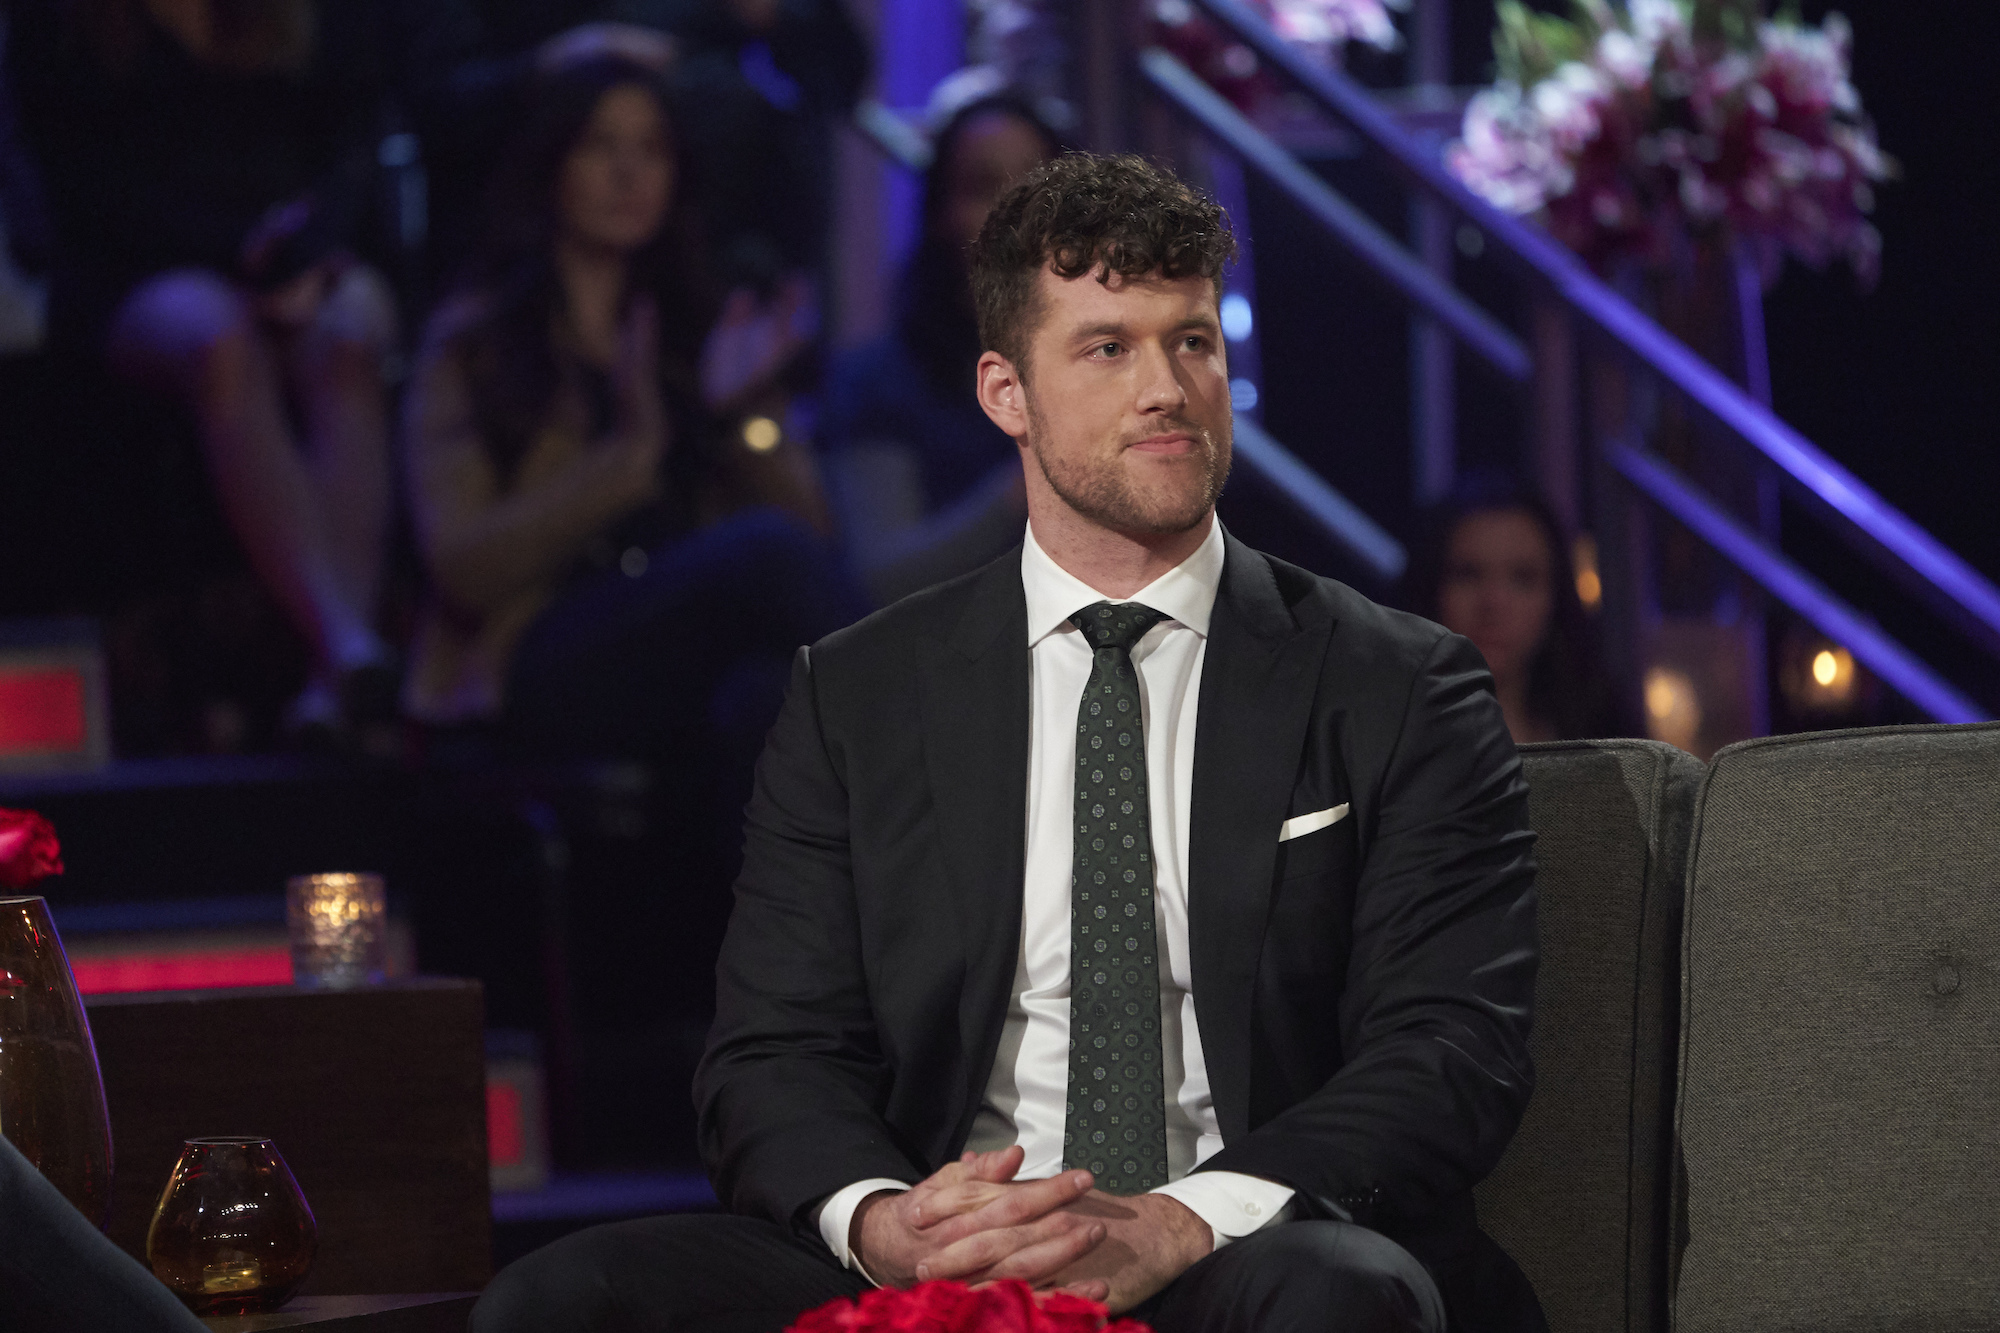 'The Bachelor' star Clayton Echard wearing a suit while on stage at the 'Women Tell All.'